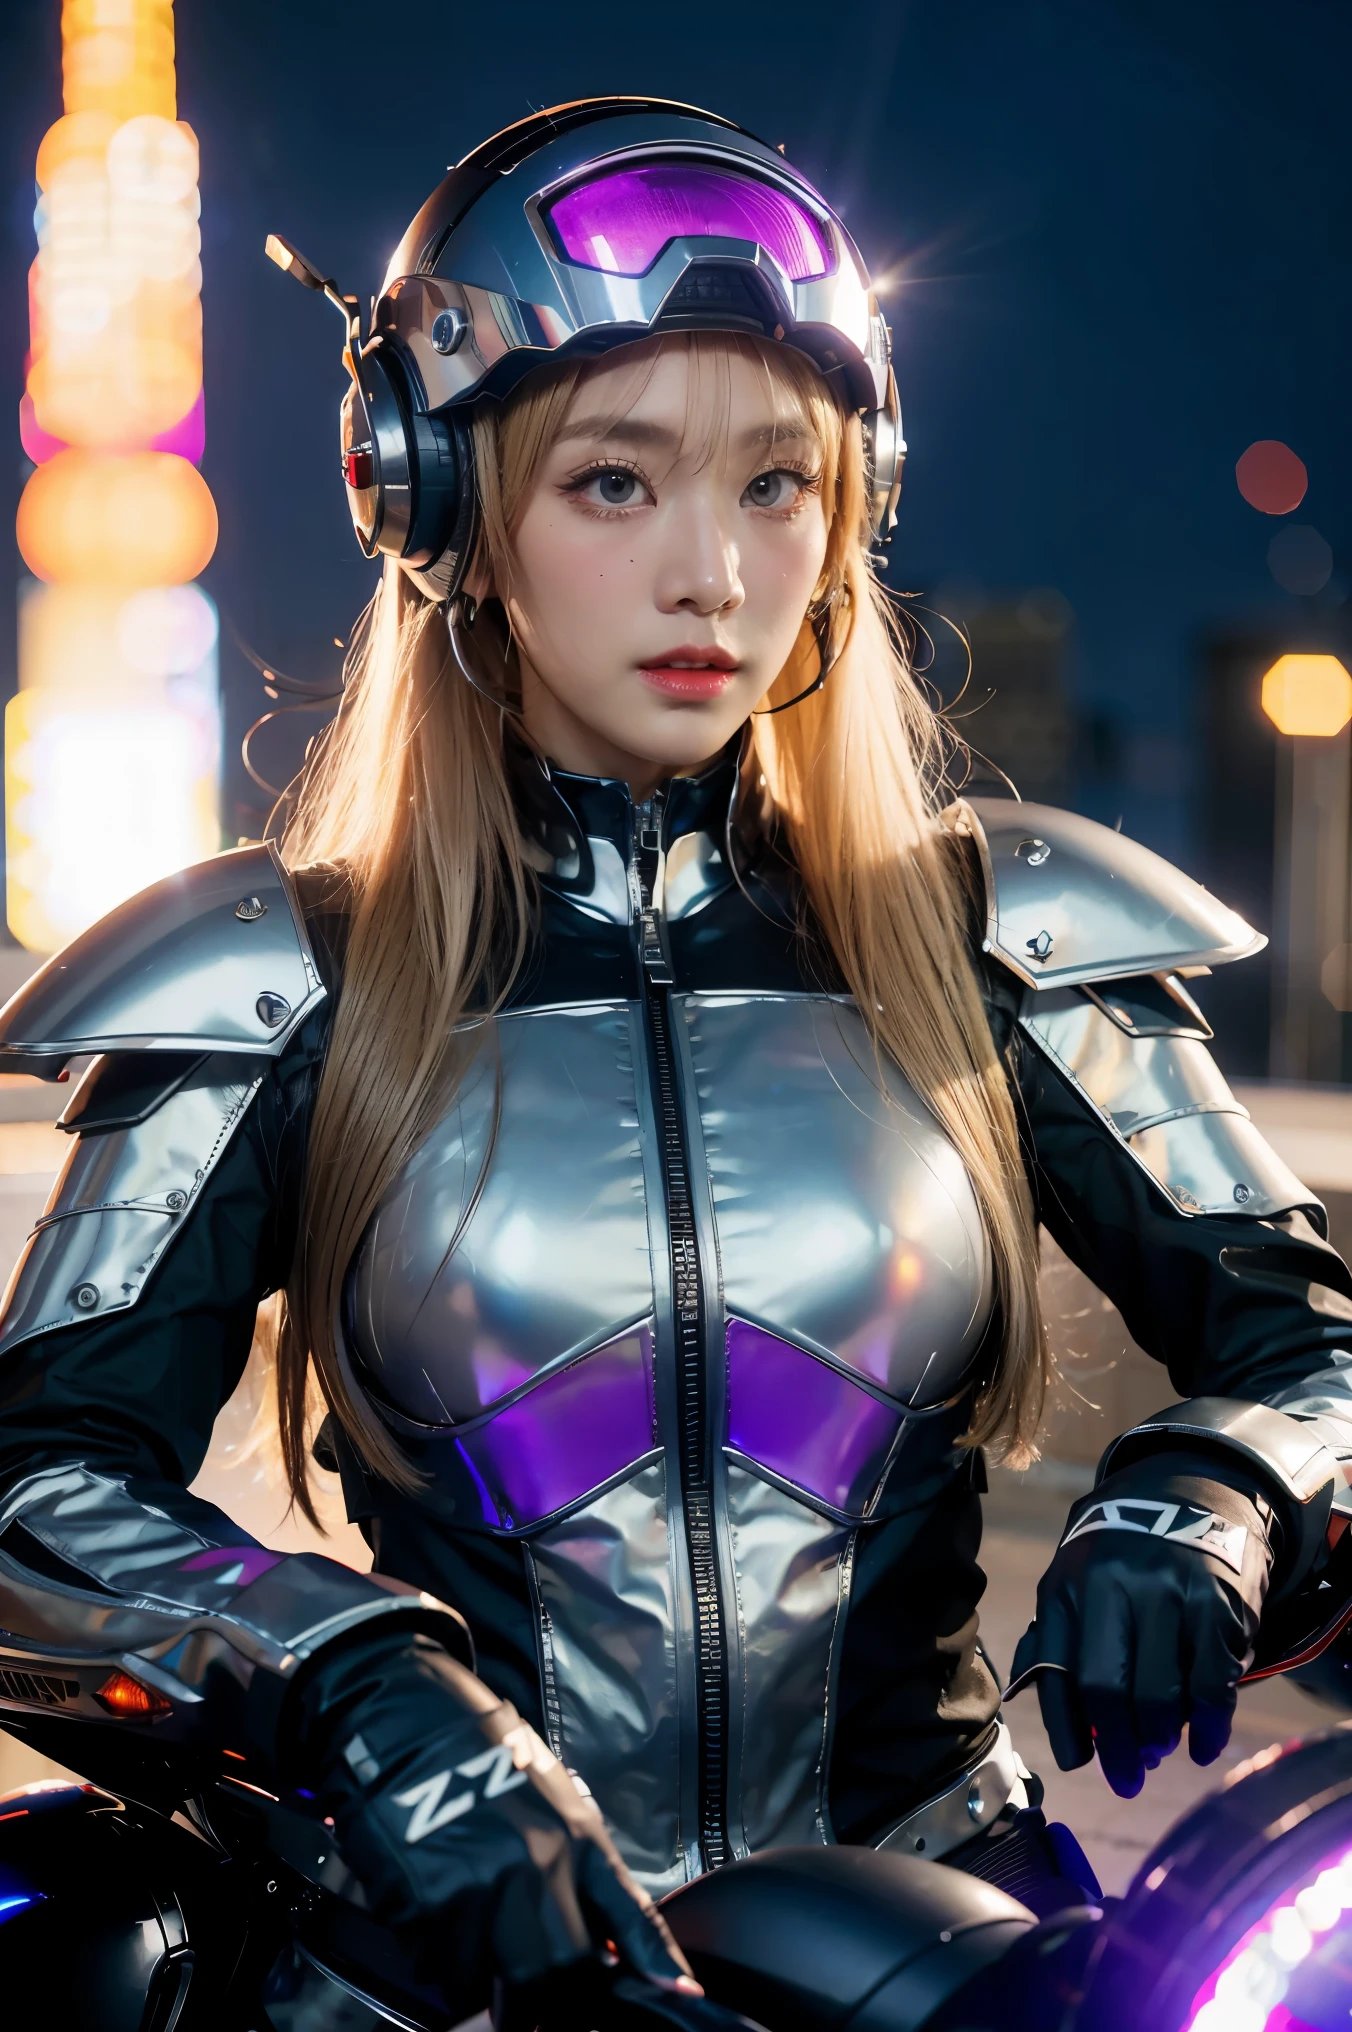 Highest image quality, outstanding details, ultra-high resolution, (realism: 1.4), the best illustration, favor details, highly condensed 1girl, charming Russian model Nata Lee, with a delicate and beautiful face, light blonde hair, dressed in a black and purple mecha, wearing a mecha helmet, holding a directional controller, riding on a motorcycle, the background is a high-tech lighting scene of the future city.